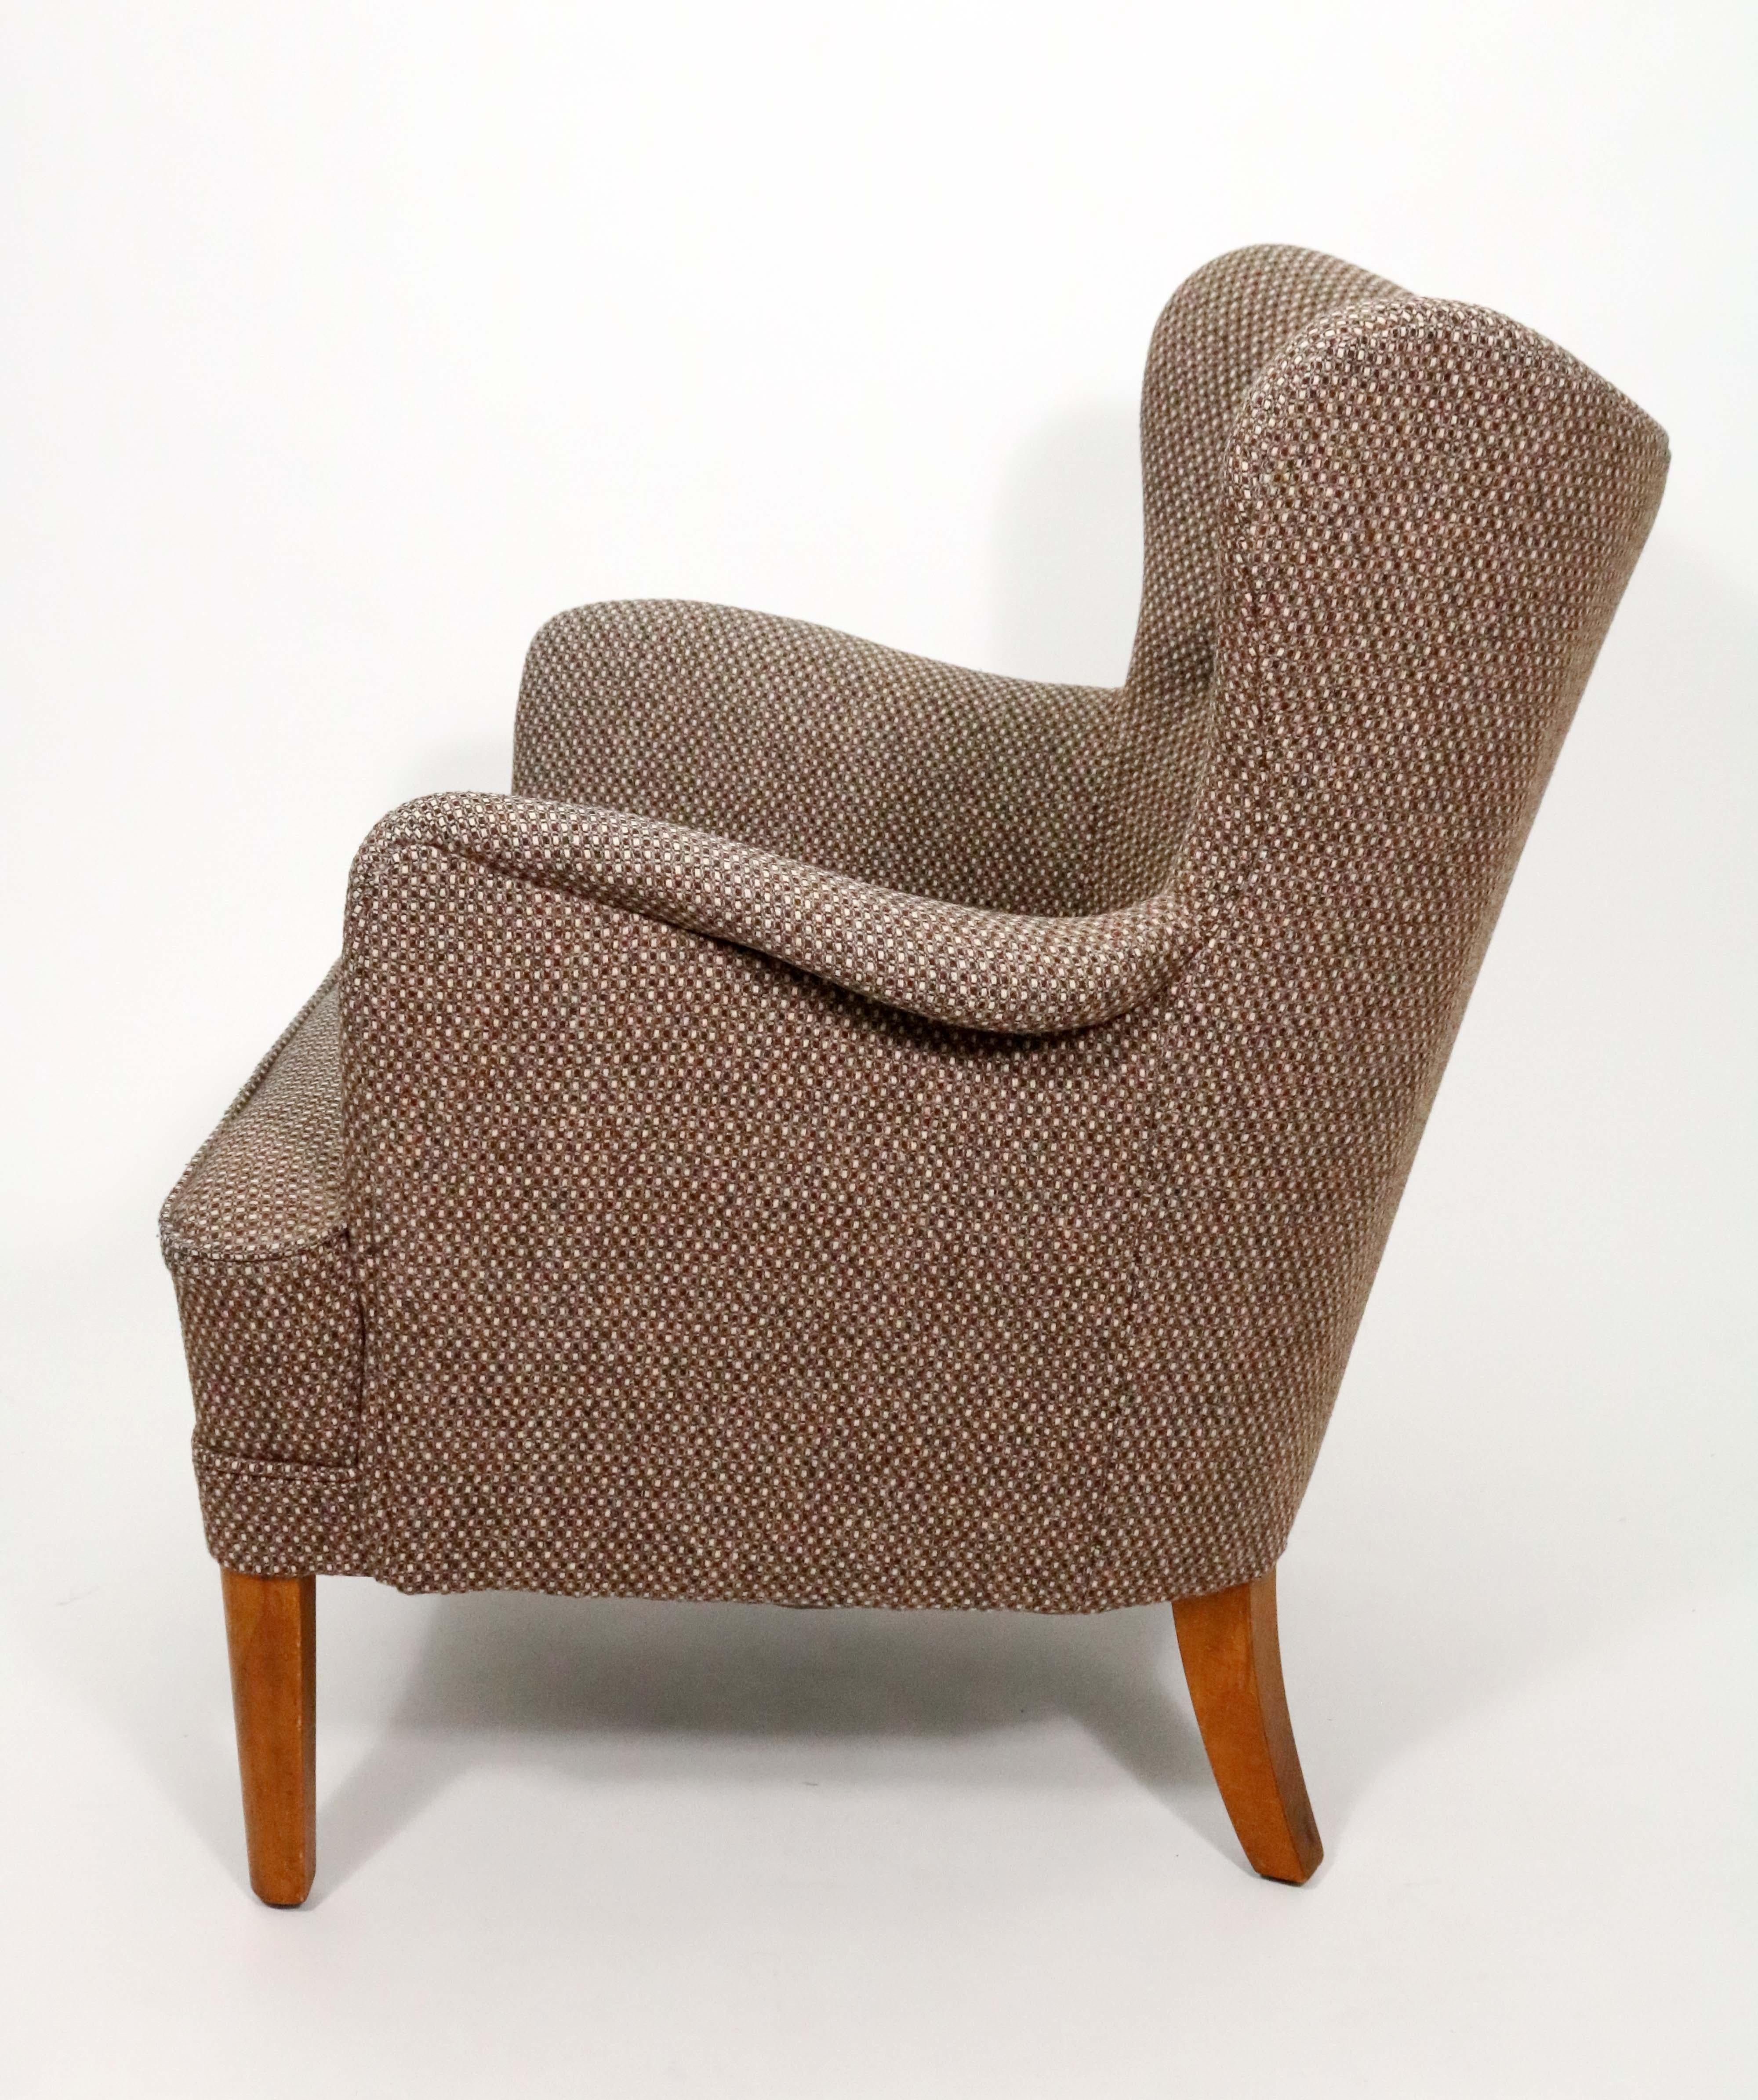 Mid-20th Century Scandinavian Modern Arm Chair in the Style of Carl Malmsten